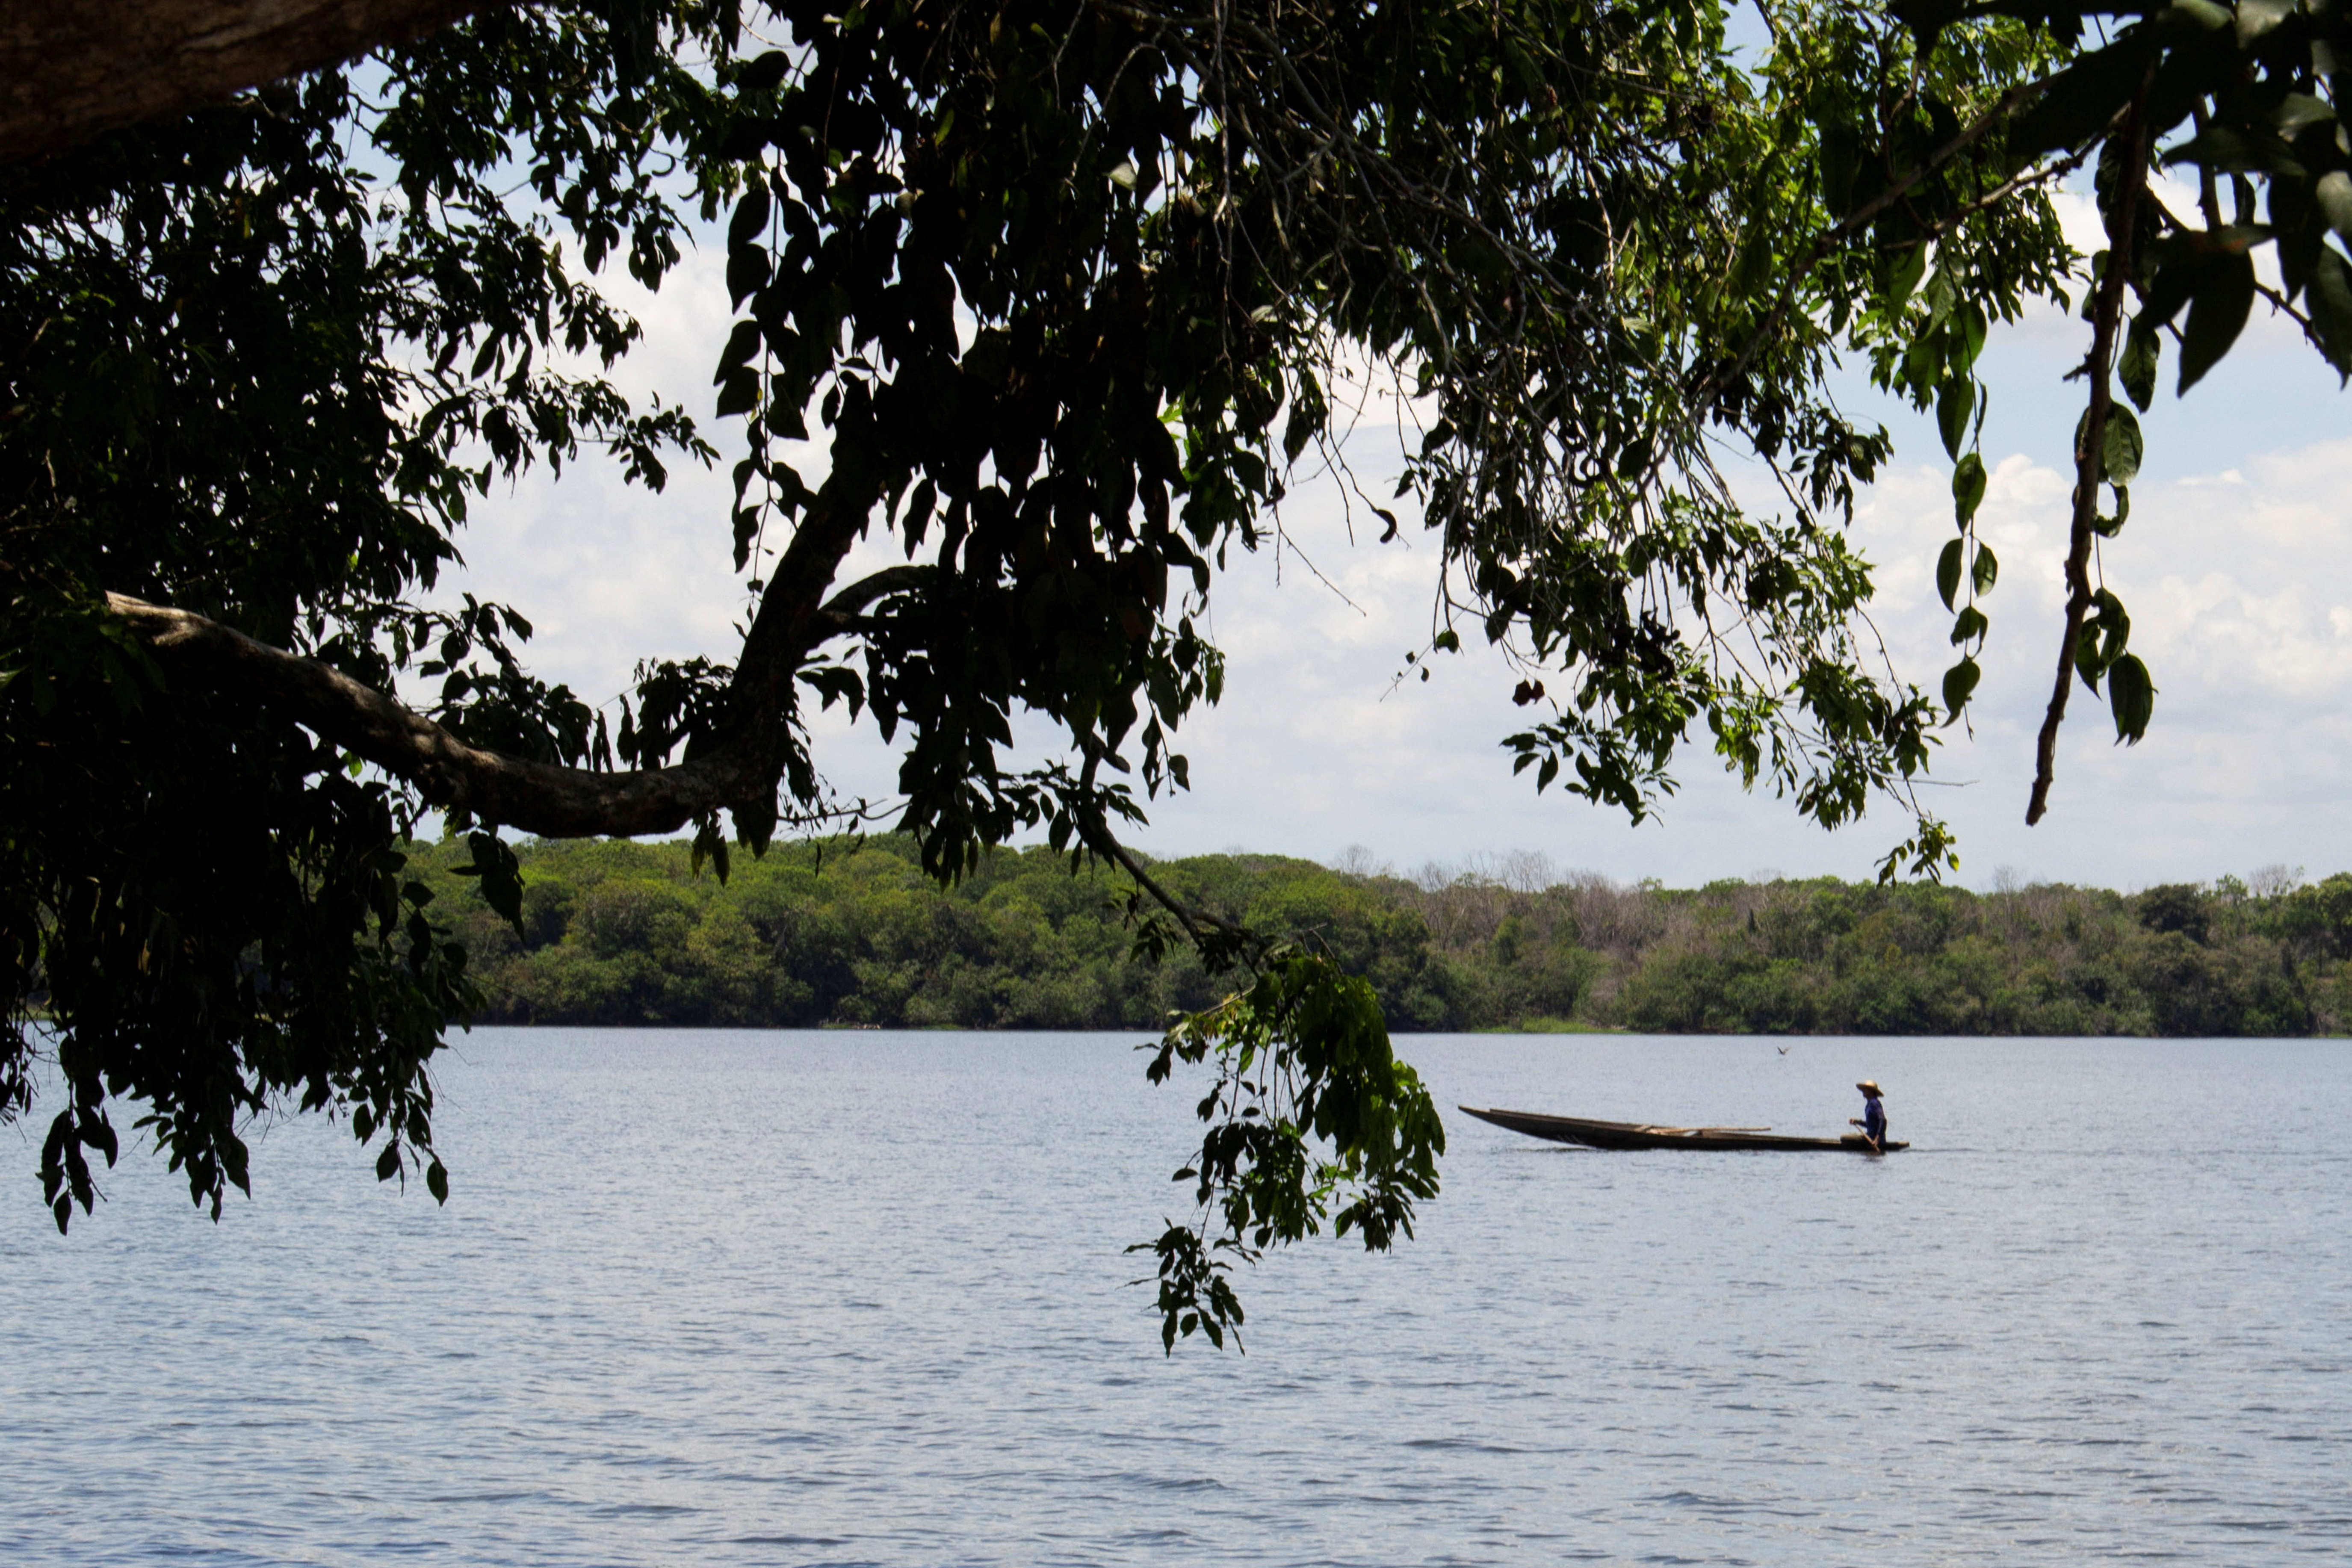 A man rides a canoe on the Magdalena River in Puerto Wilches